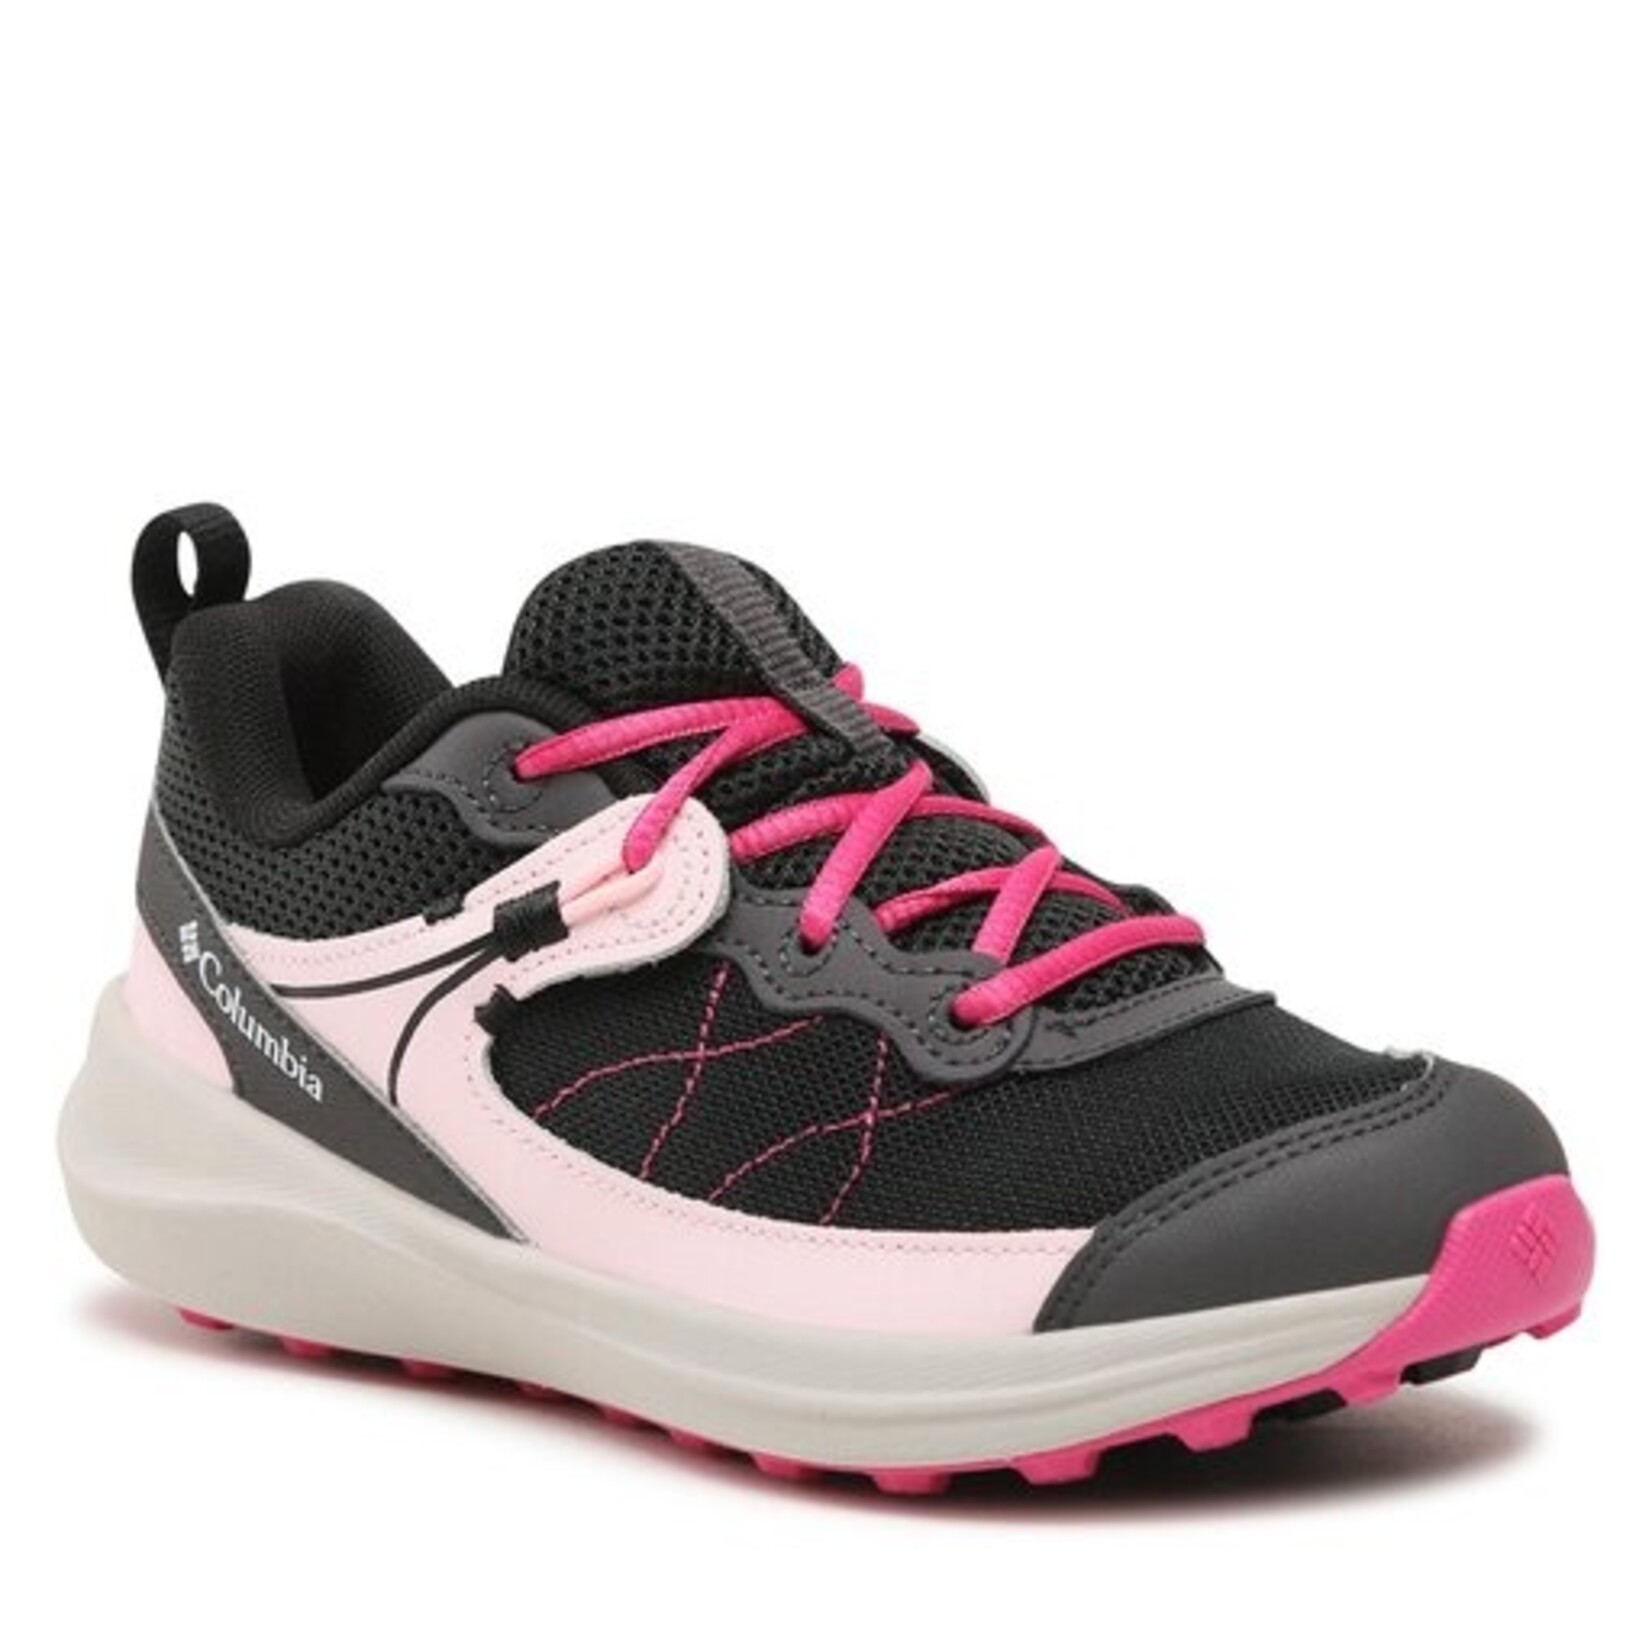 Columbia Columbia YOUTH trailstorm - black, pink ice